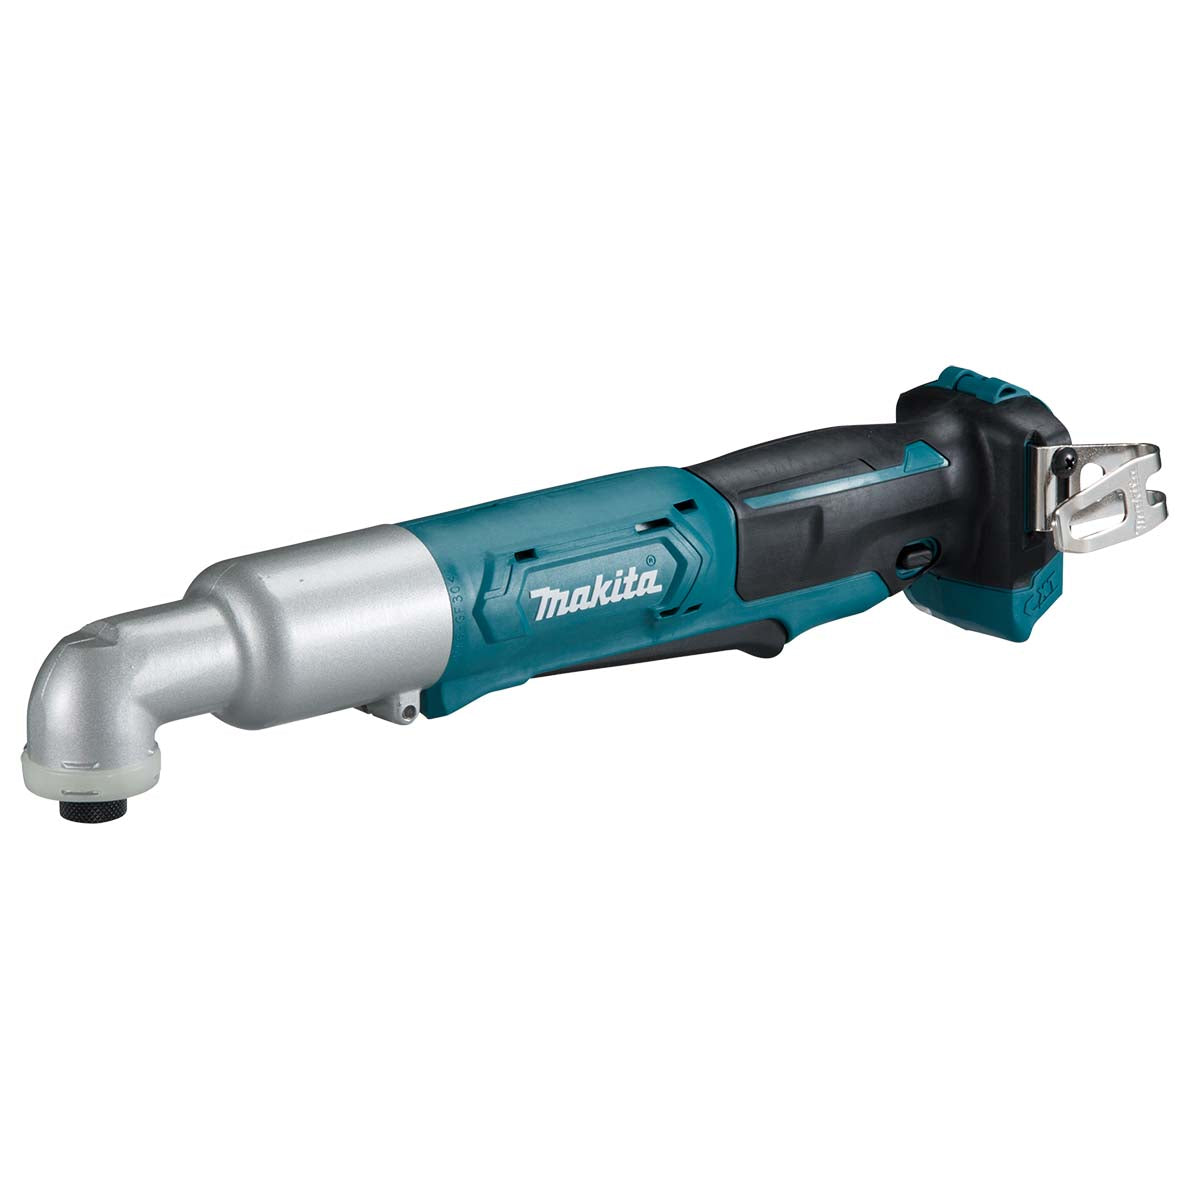 12V Brushless Angled Impact Driver Bare (Tool Only) TL064DZ by Makita